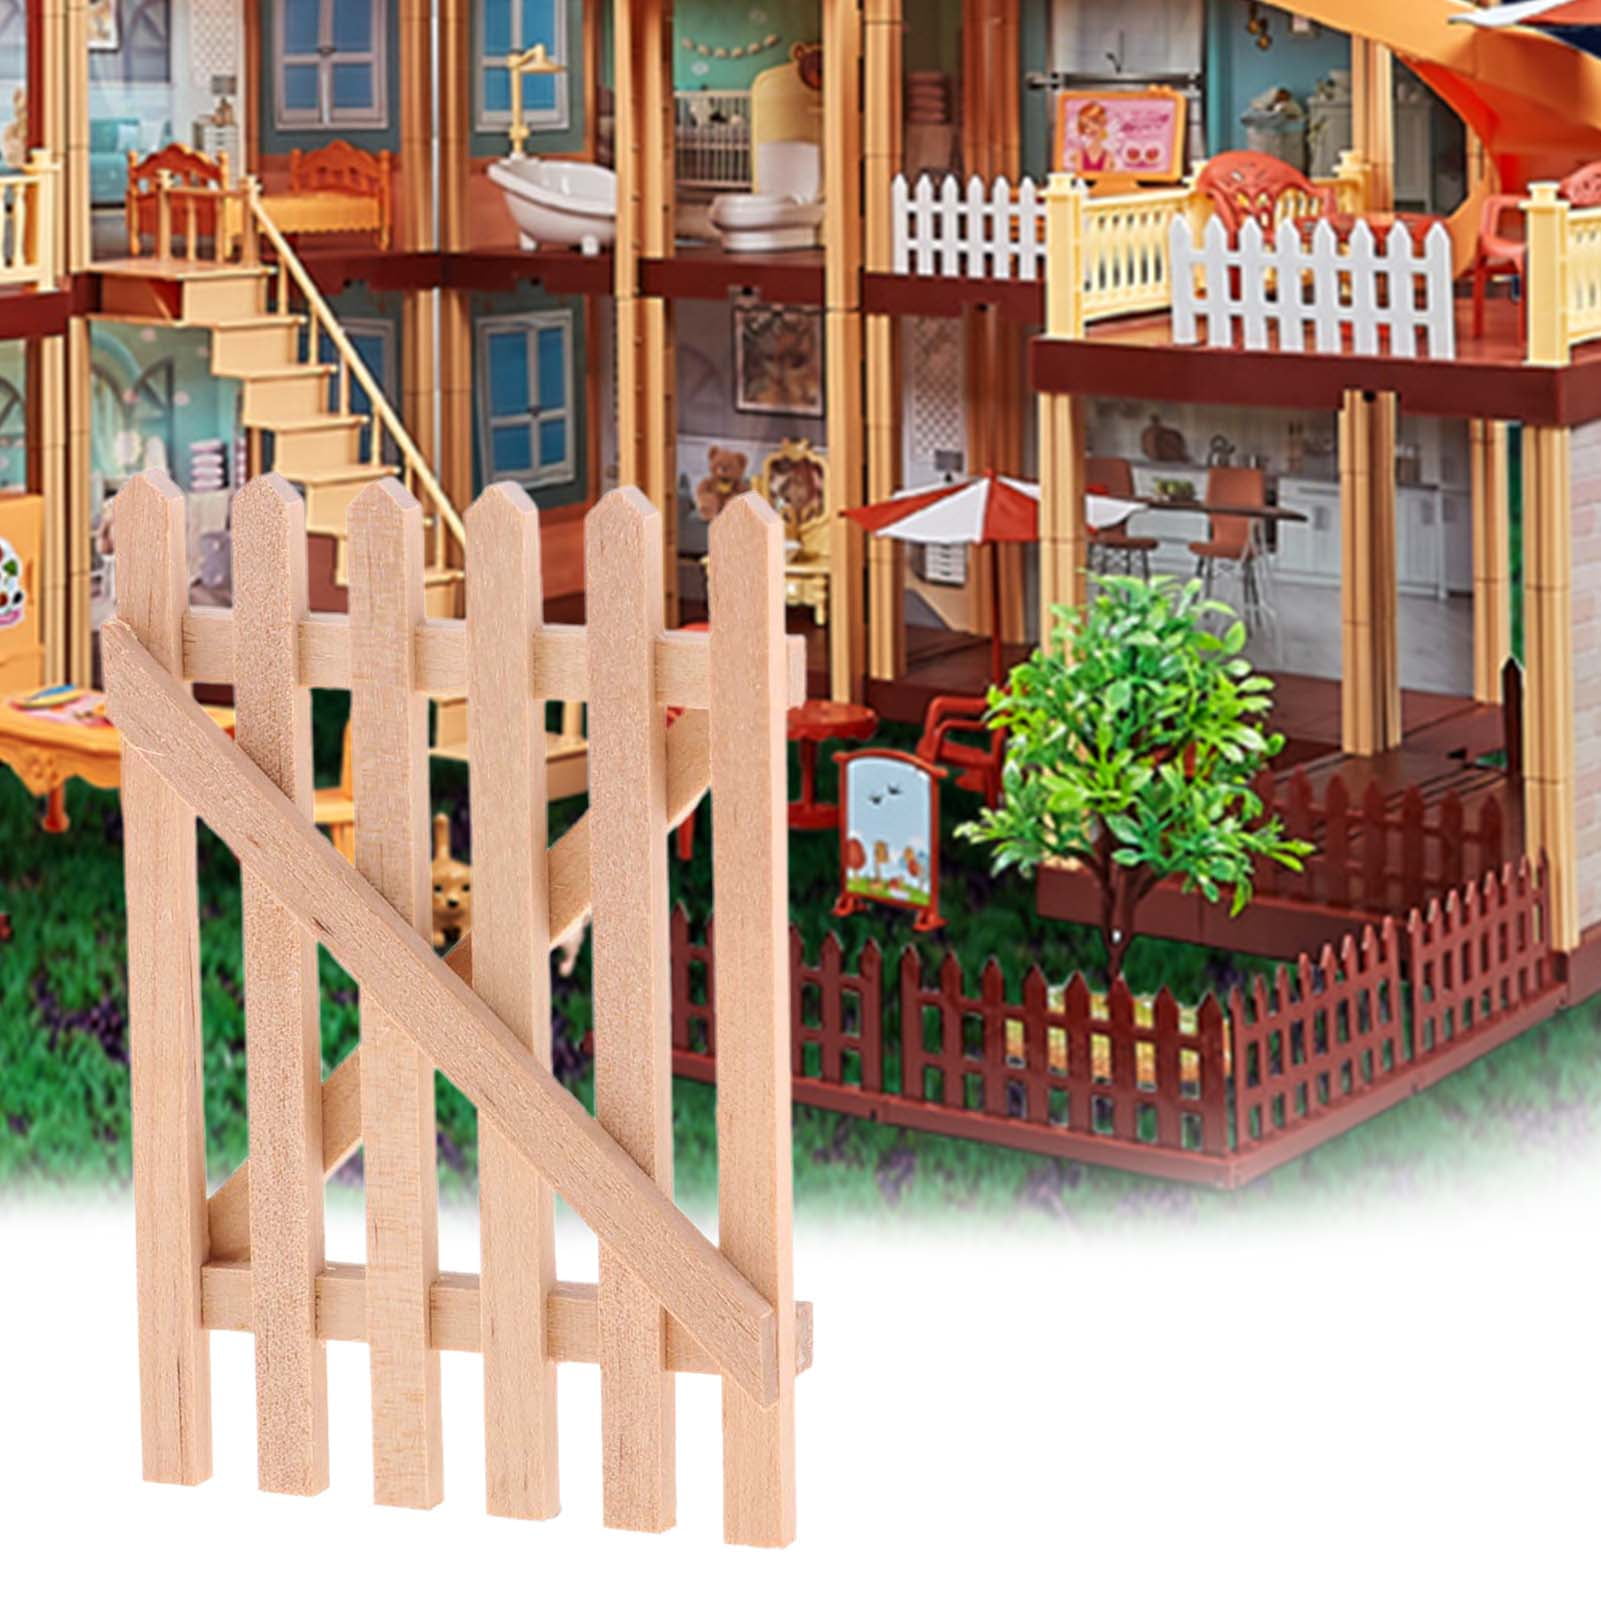 Mini Long Wooden Fence For 1:12 Miniature Dollhouse/Decoration/Accessories/Model 